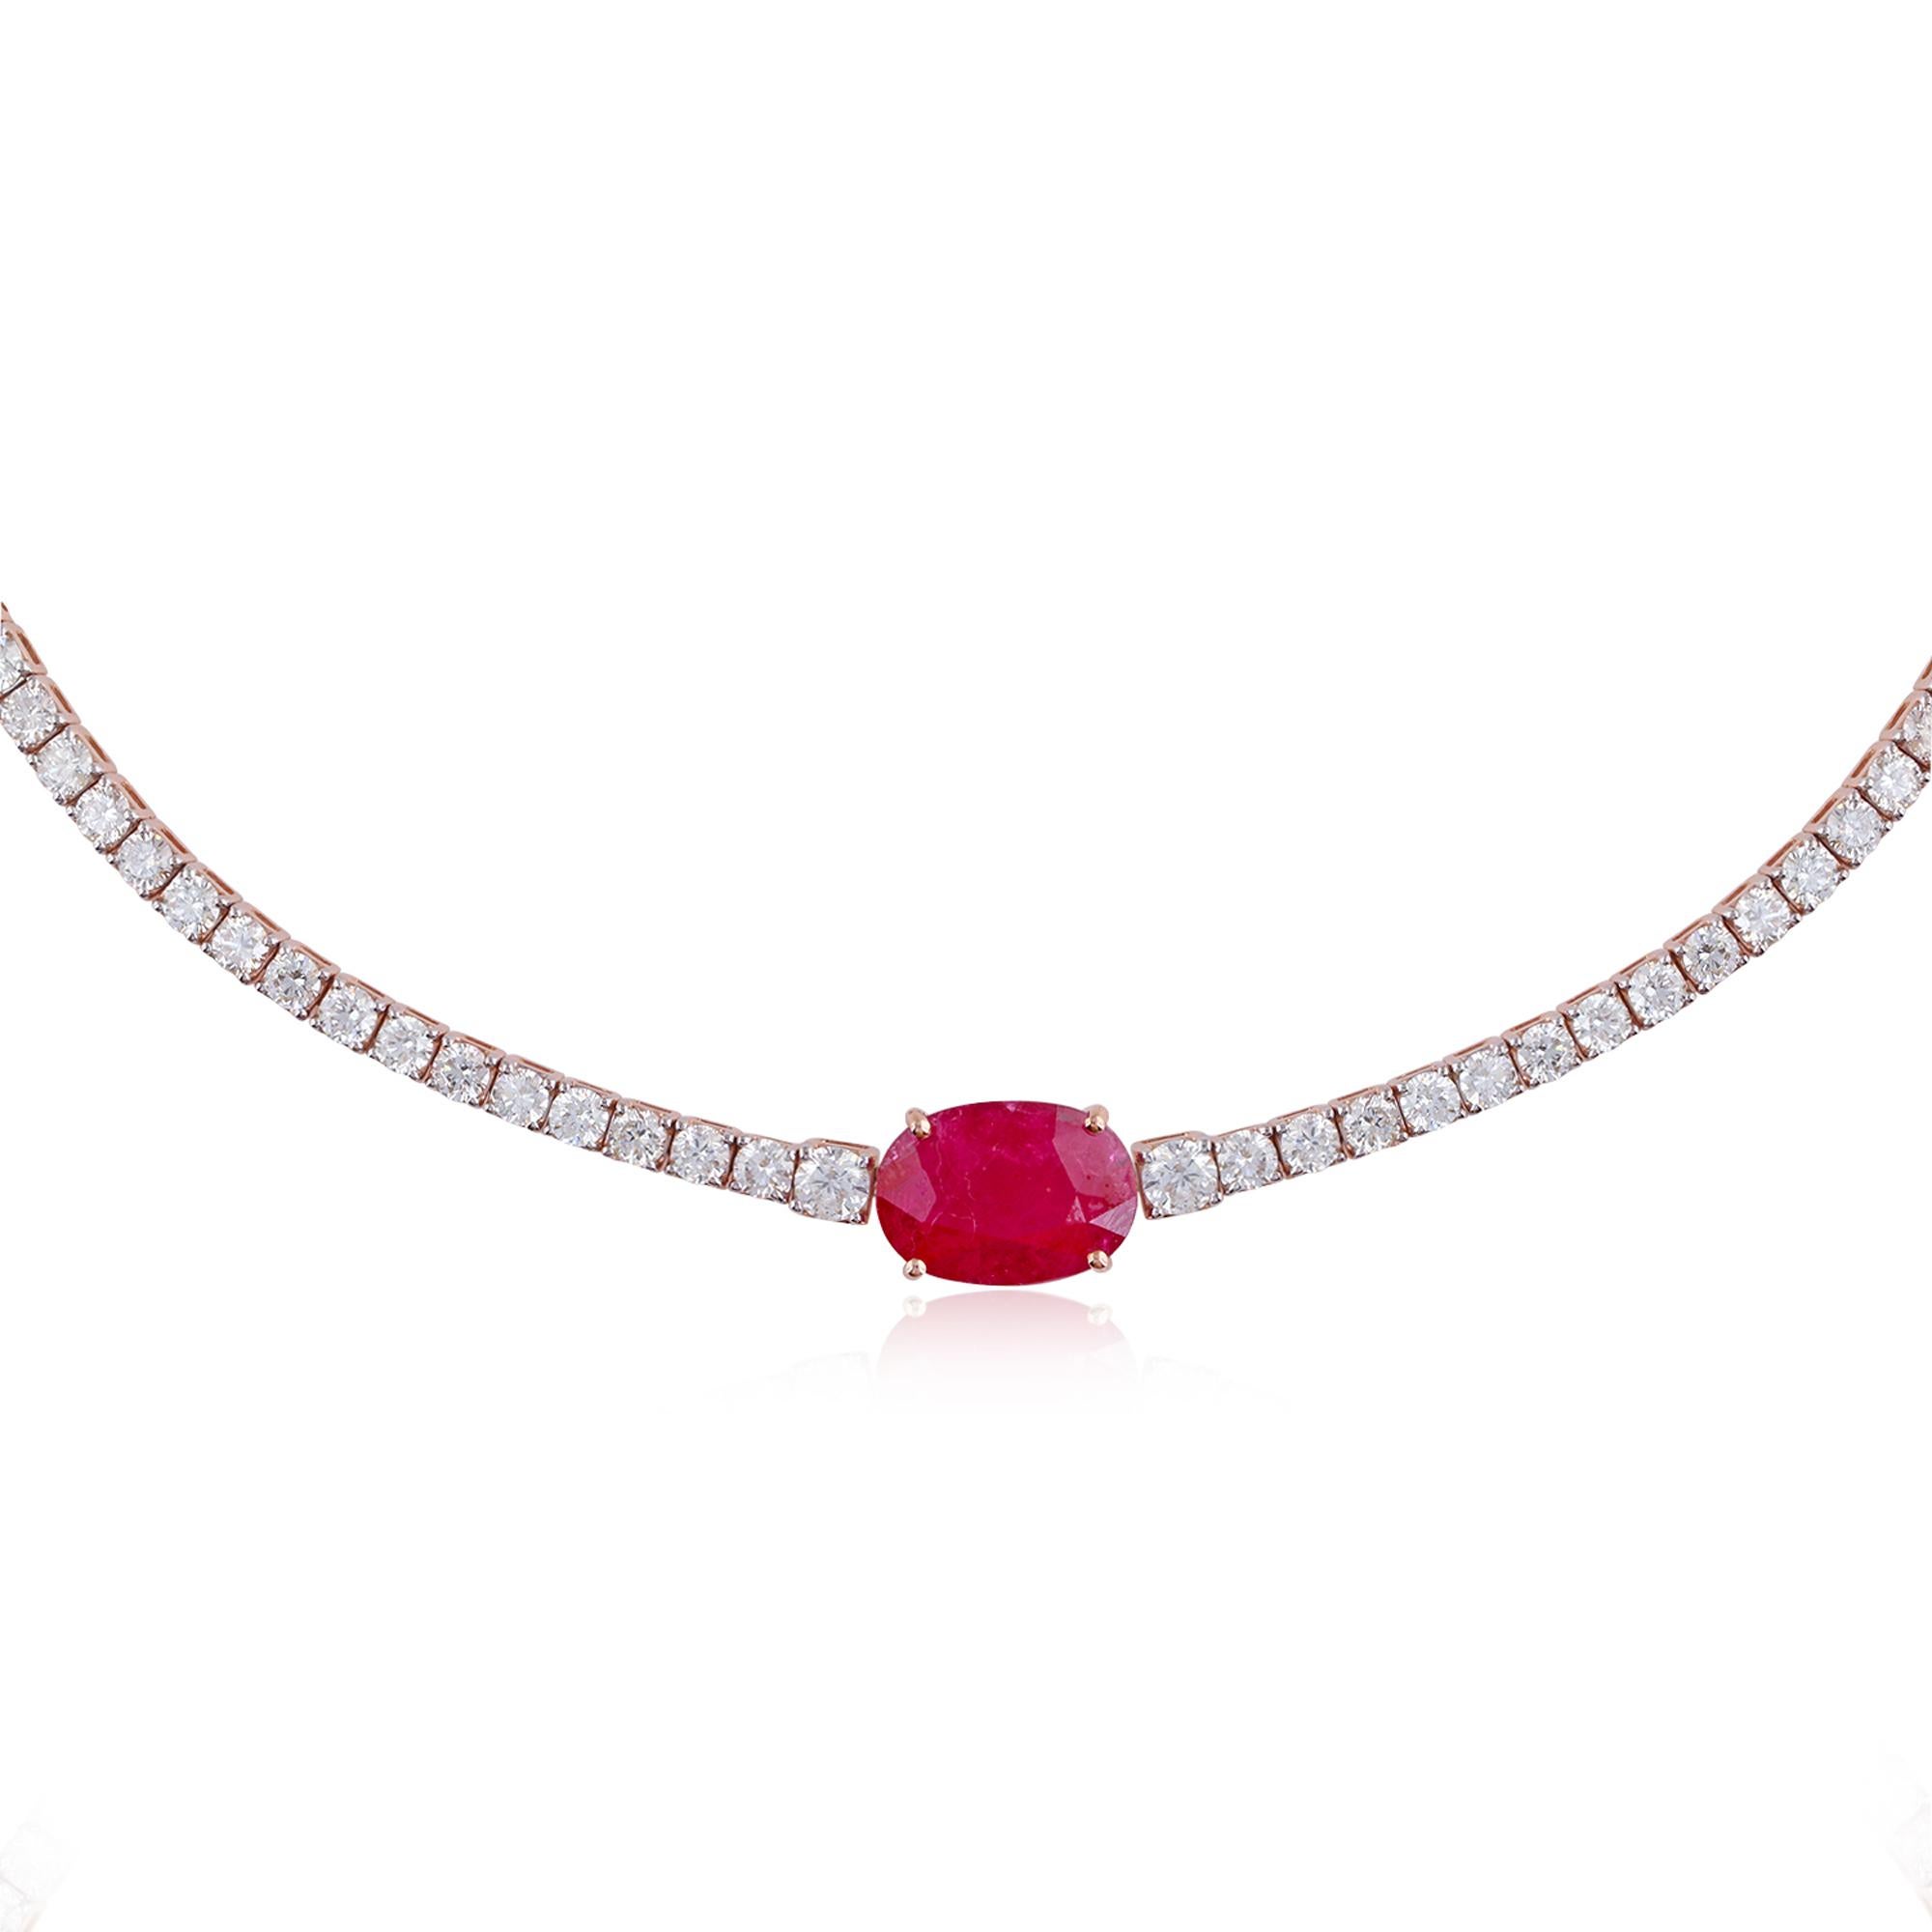 The choker necklace is crafted from 18 Karat Rose Gold, adding a touch of warmth and femininity to the design. The rose gold complements the vibrant red of the ruby and creates a harmonious combination that exudes grace and refinement.

Item Code :-